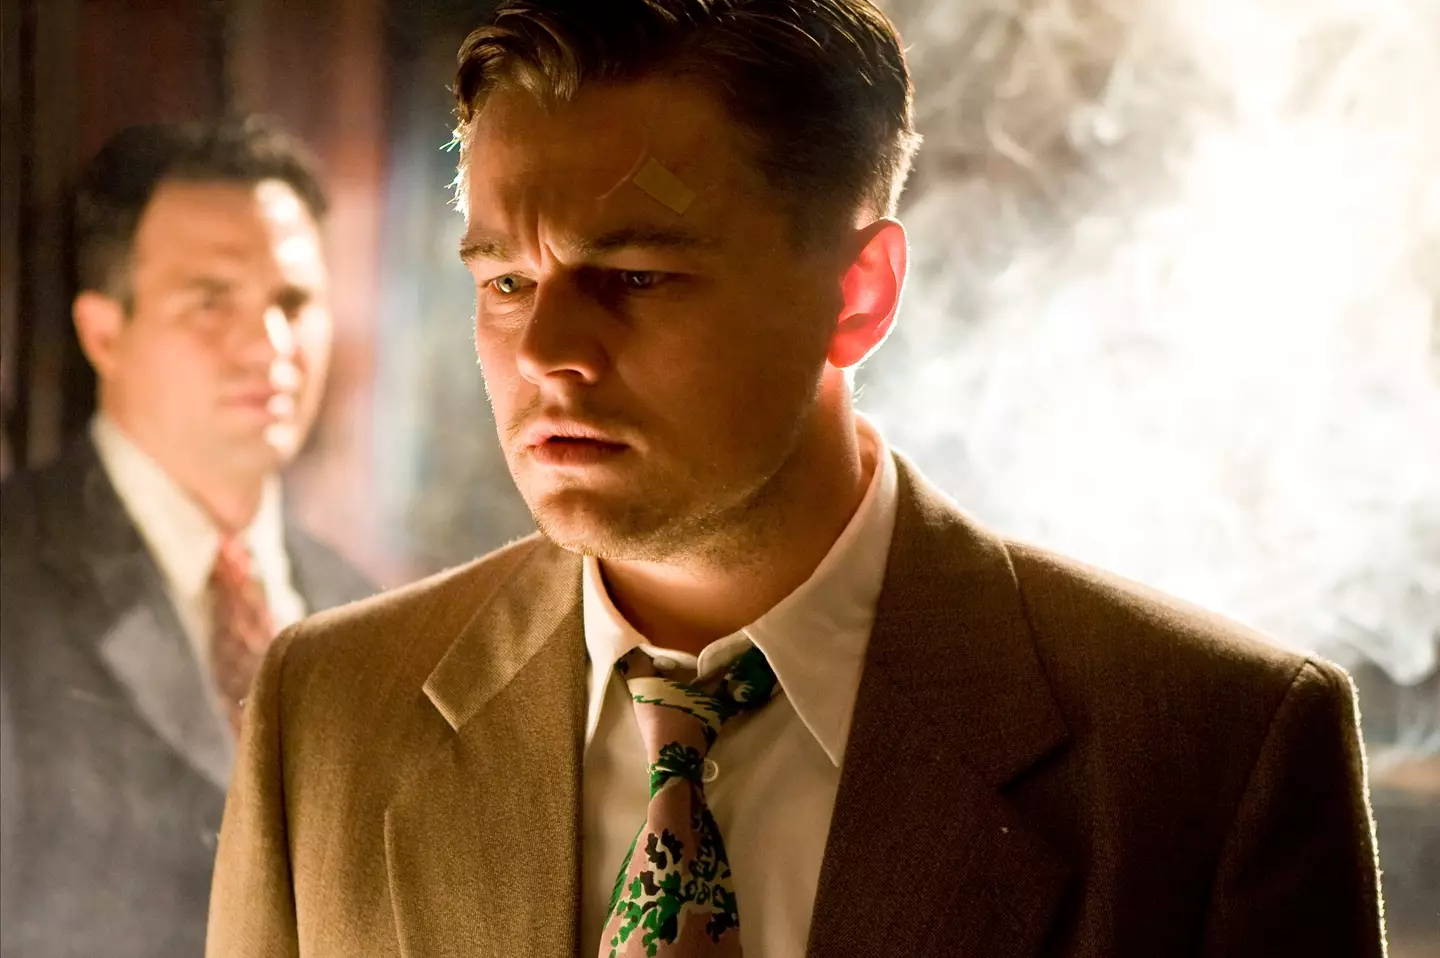 Leonardo DiCaprio and Martin Scorsese worked together on Shutter Island.